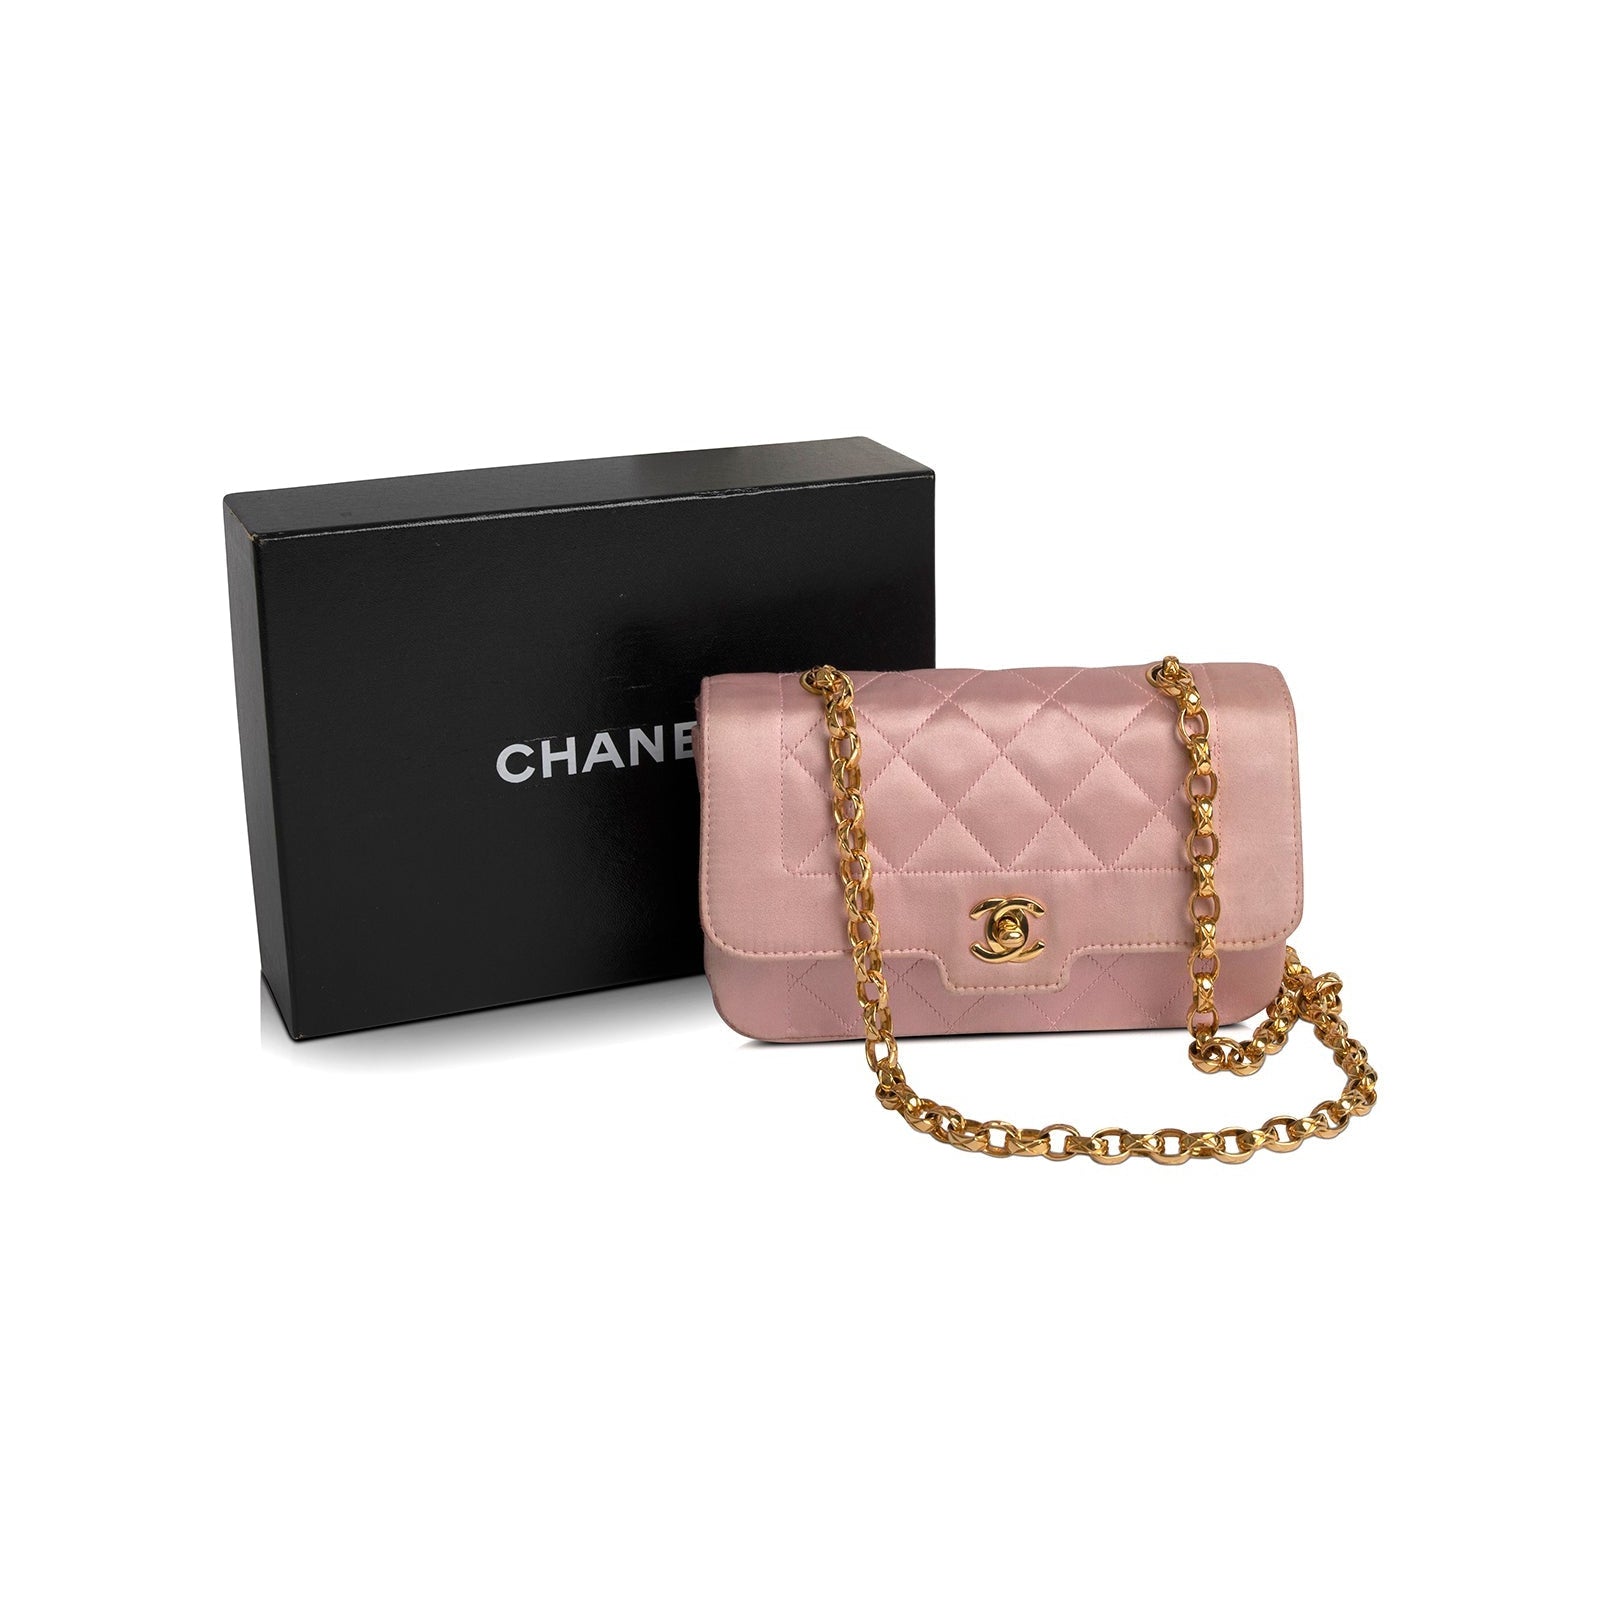 Chanel Classic Flap Diana Quilted 233156 Beige Satin Shoulder Bag, Chanel